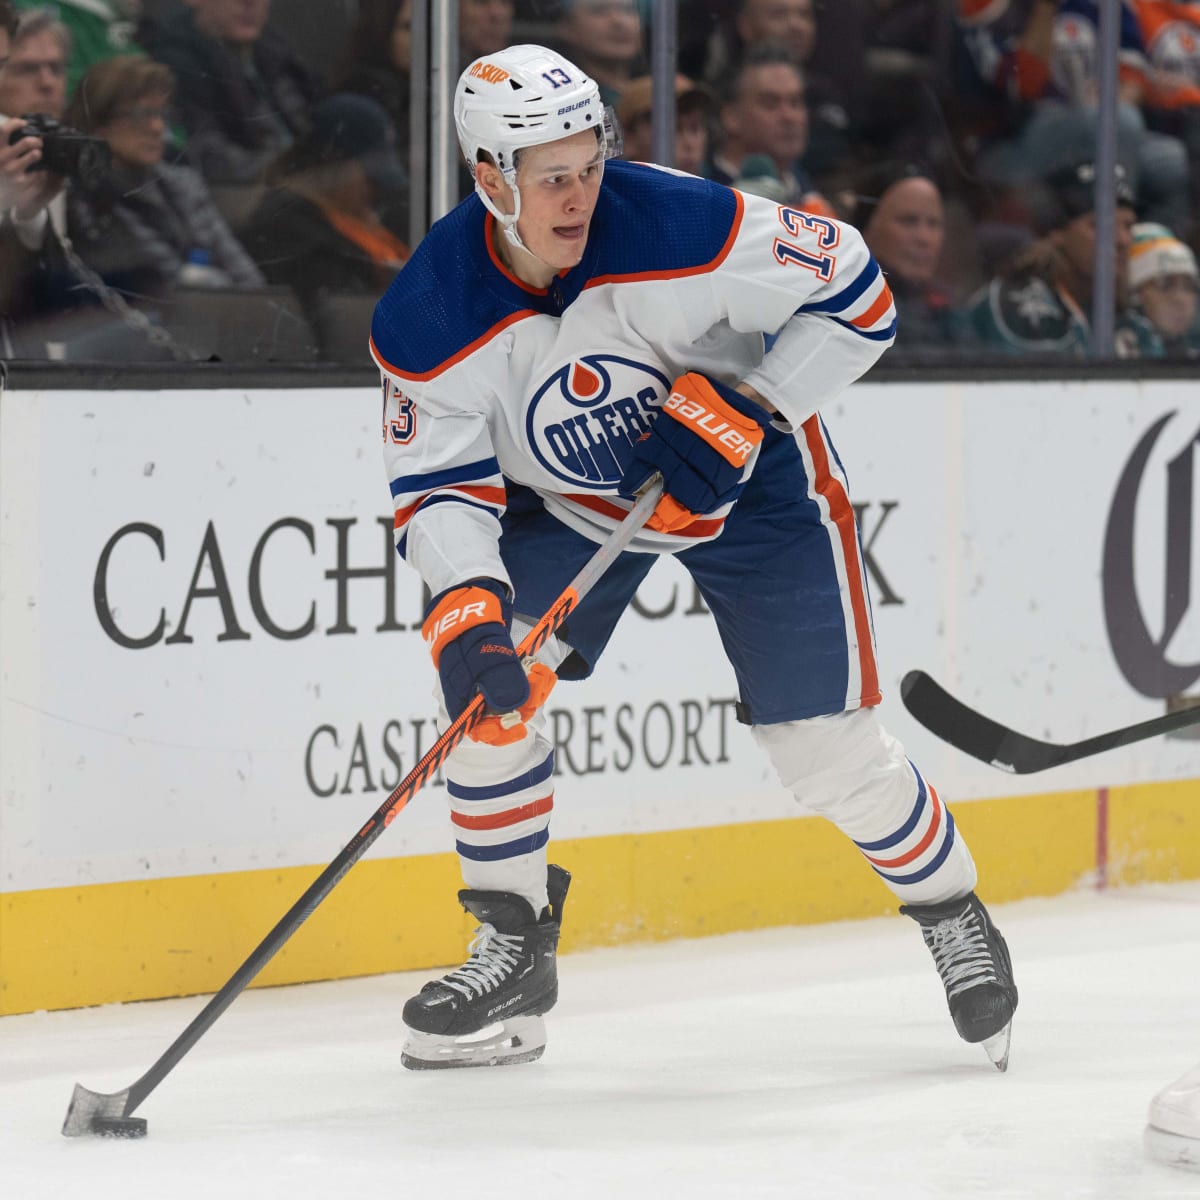 How Jesse Puljujarvi's return to Finland primed him for Oilers success:  'There were some things that had to change' - The Athletic